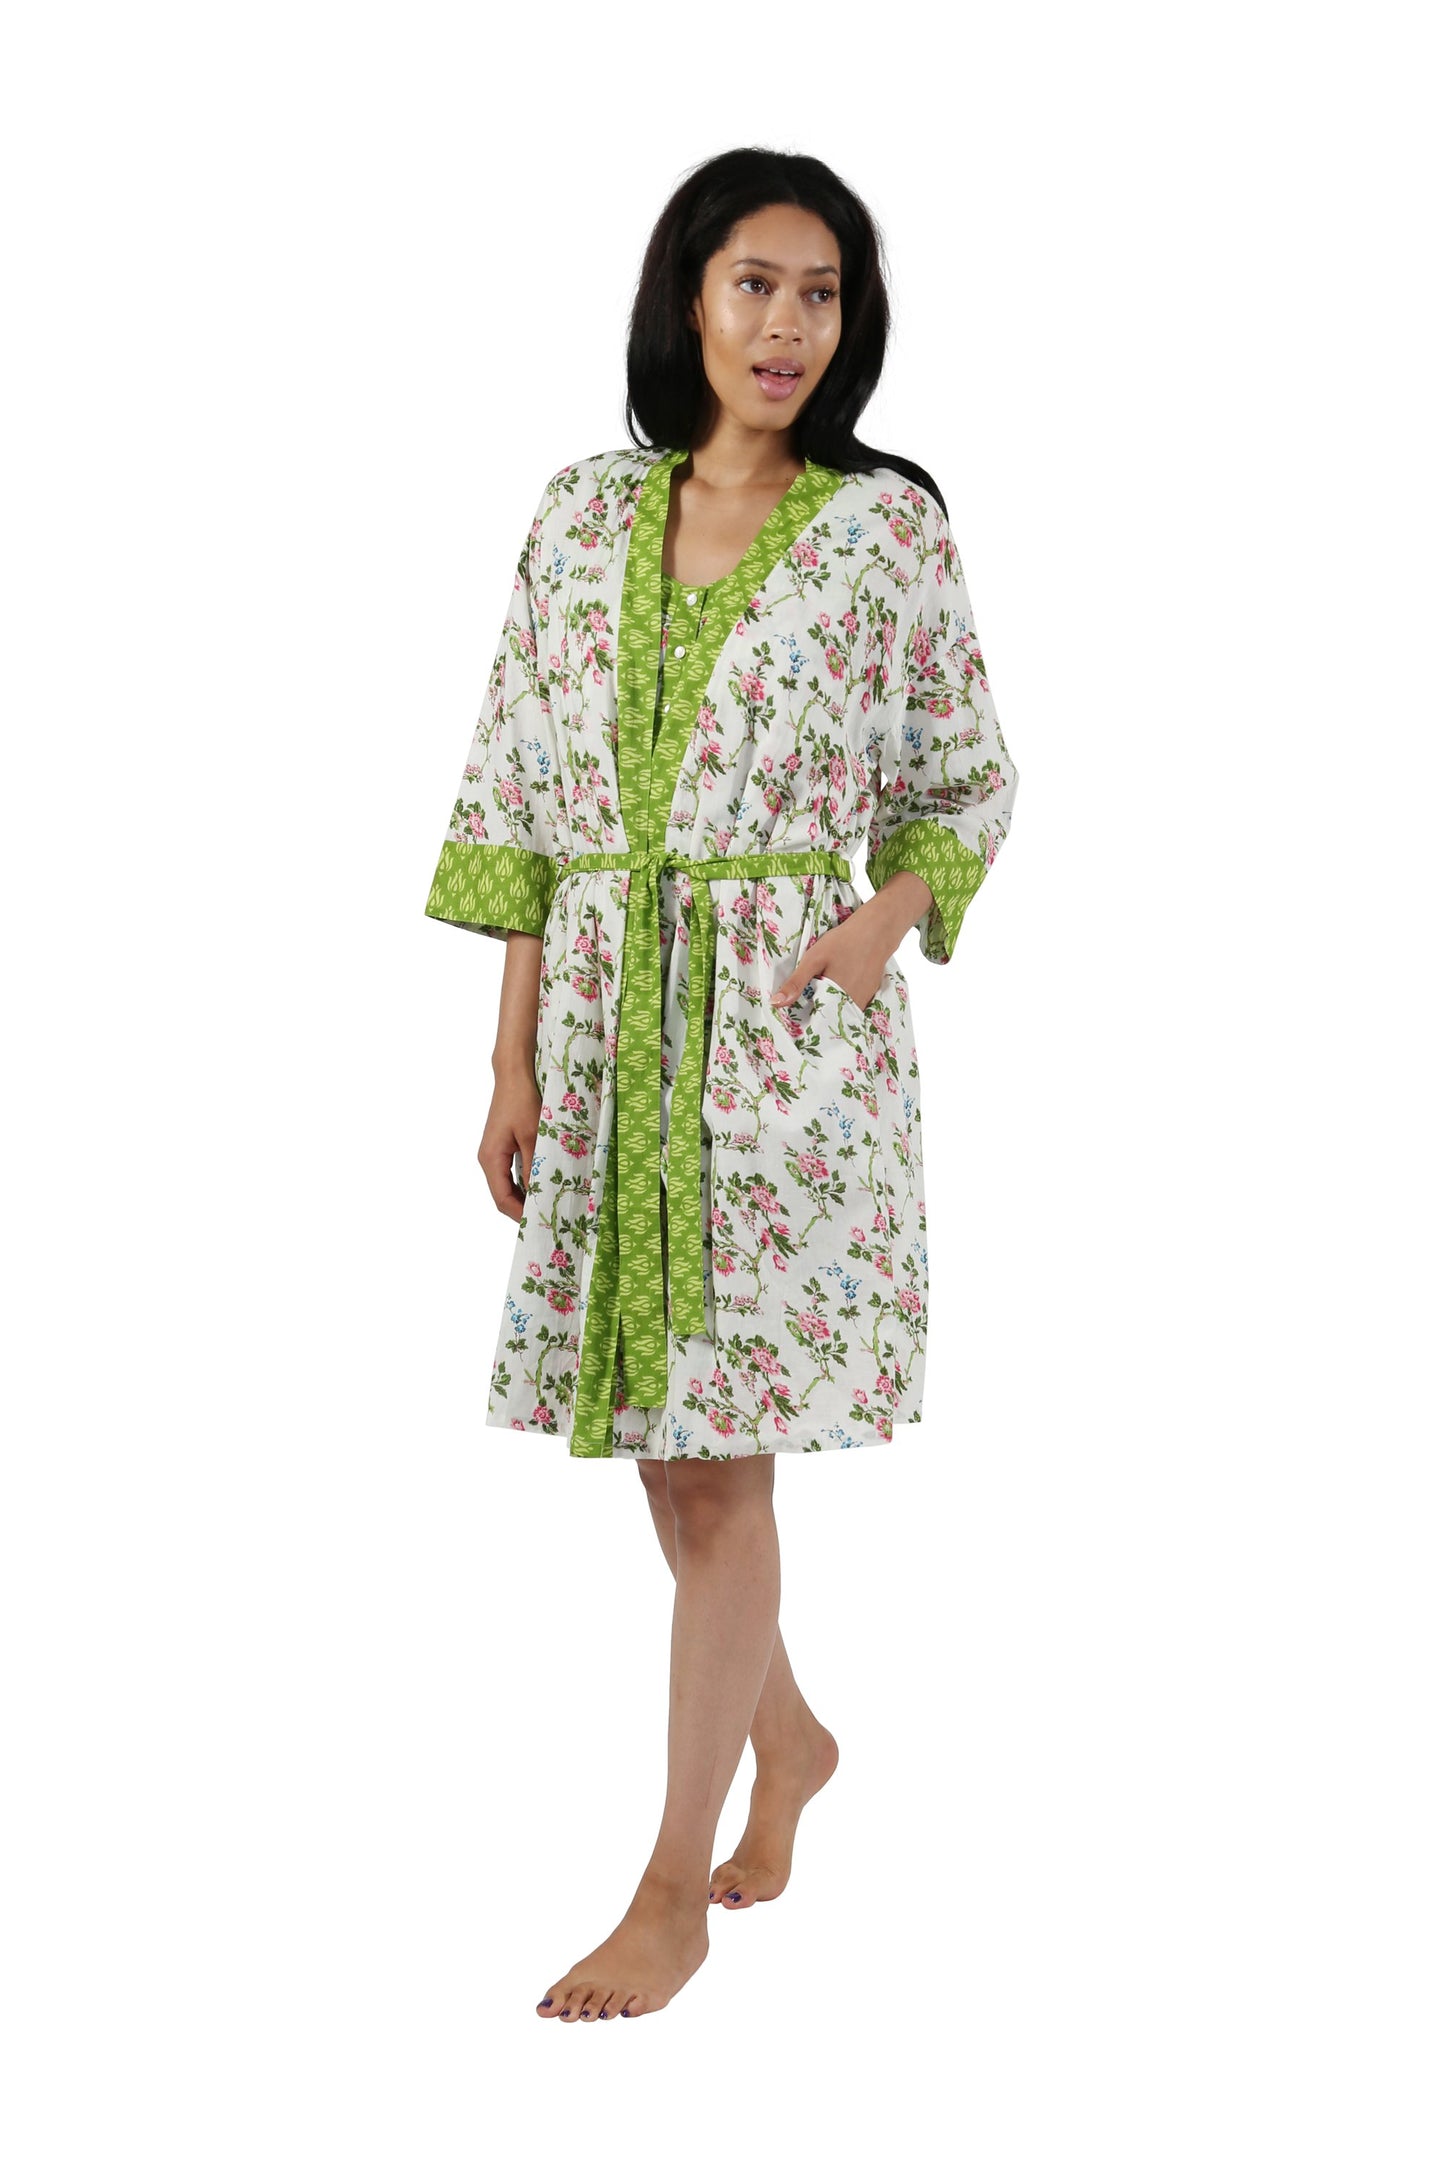 100% Cotton Floral Robe 1815F - Ivory/Green Floral